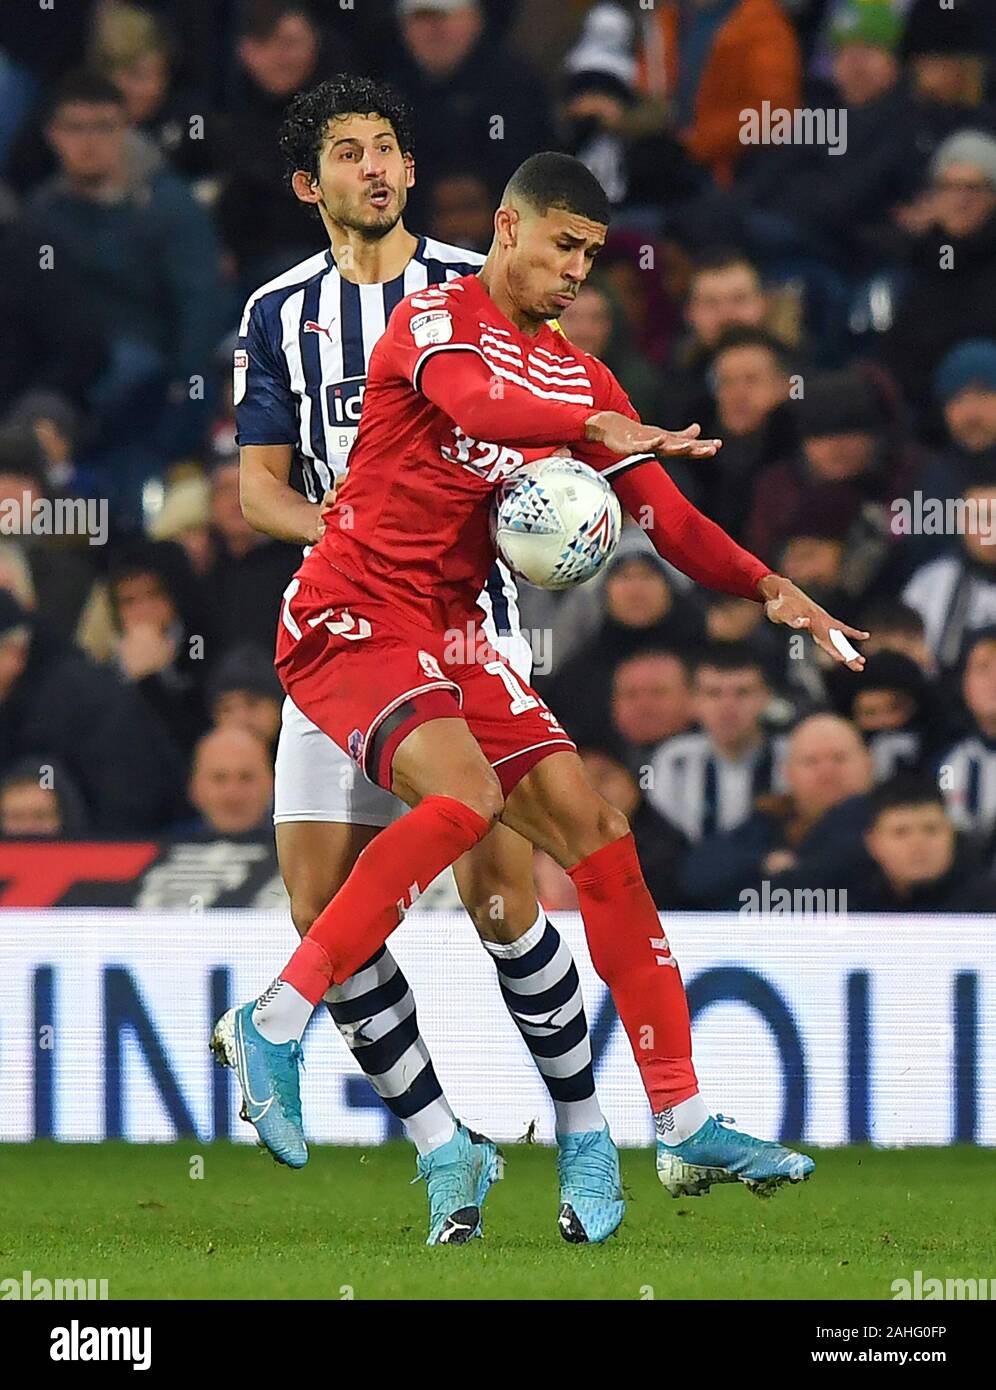 West Bromwich Albion's Ahmed Hegazy battles with Middlesbrough's Ashley Fletcher during the Sky Bet Championship match at The Hawthorns, West Bromwich. Stock Photo